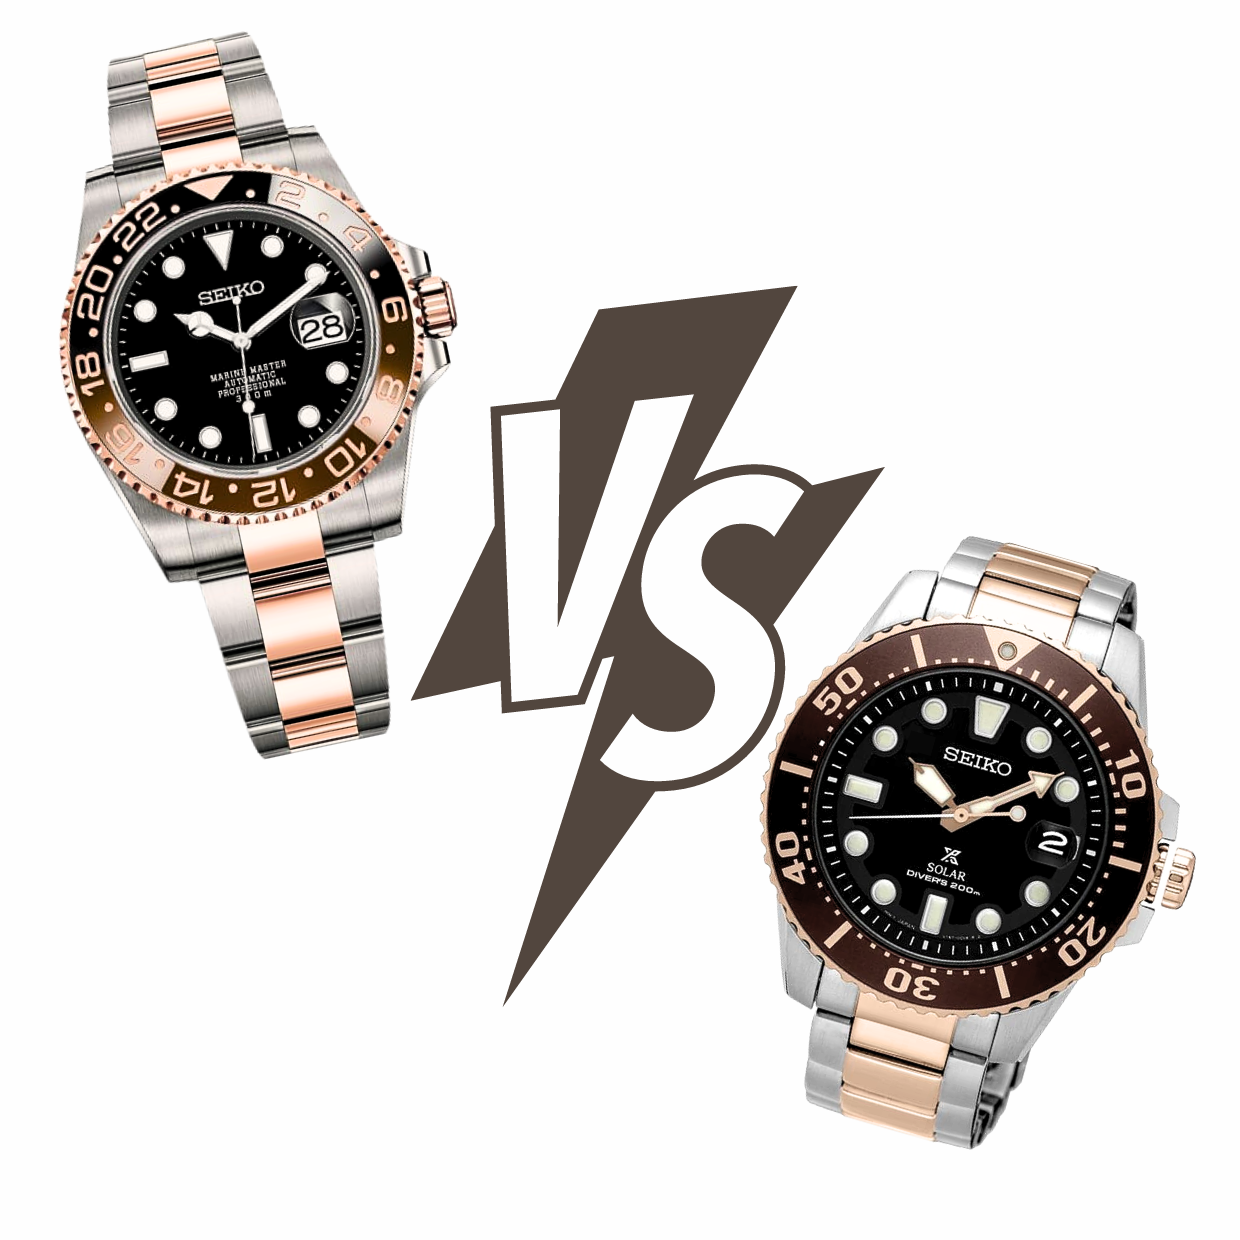 Seiko Mod Watches vs. Traditional Seiko Watches: What's the Difference?